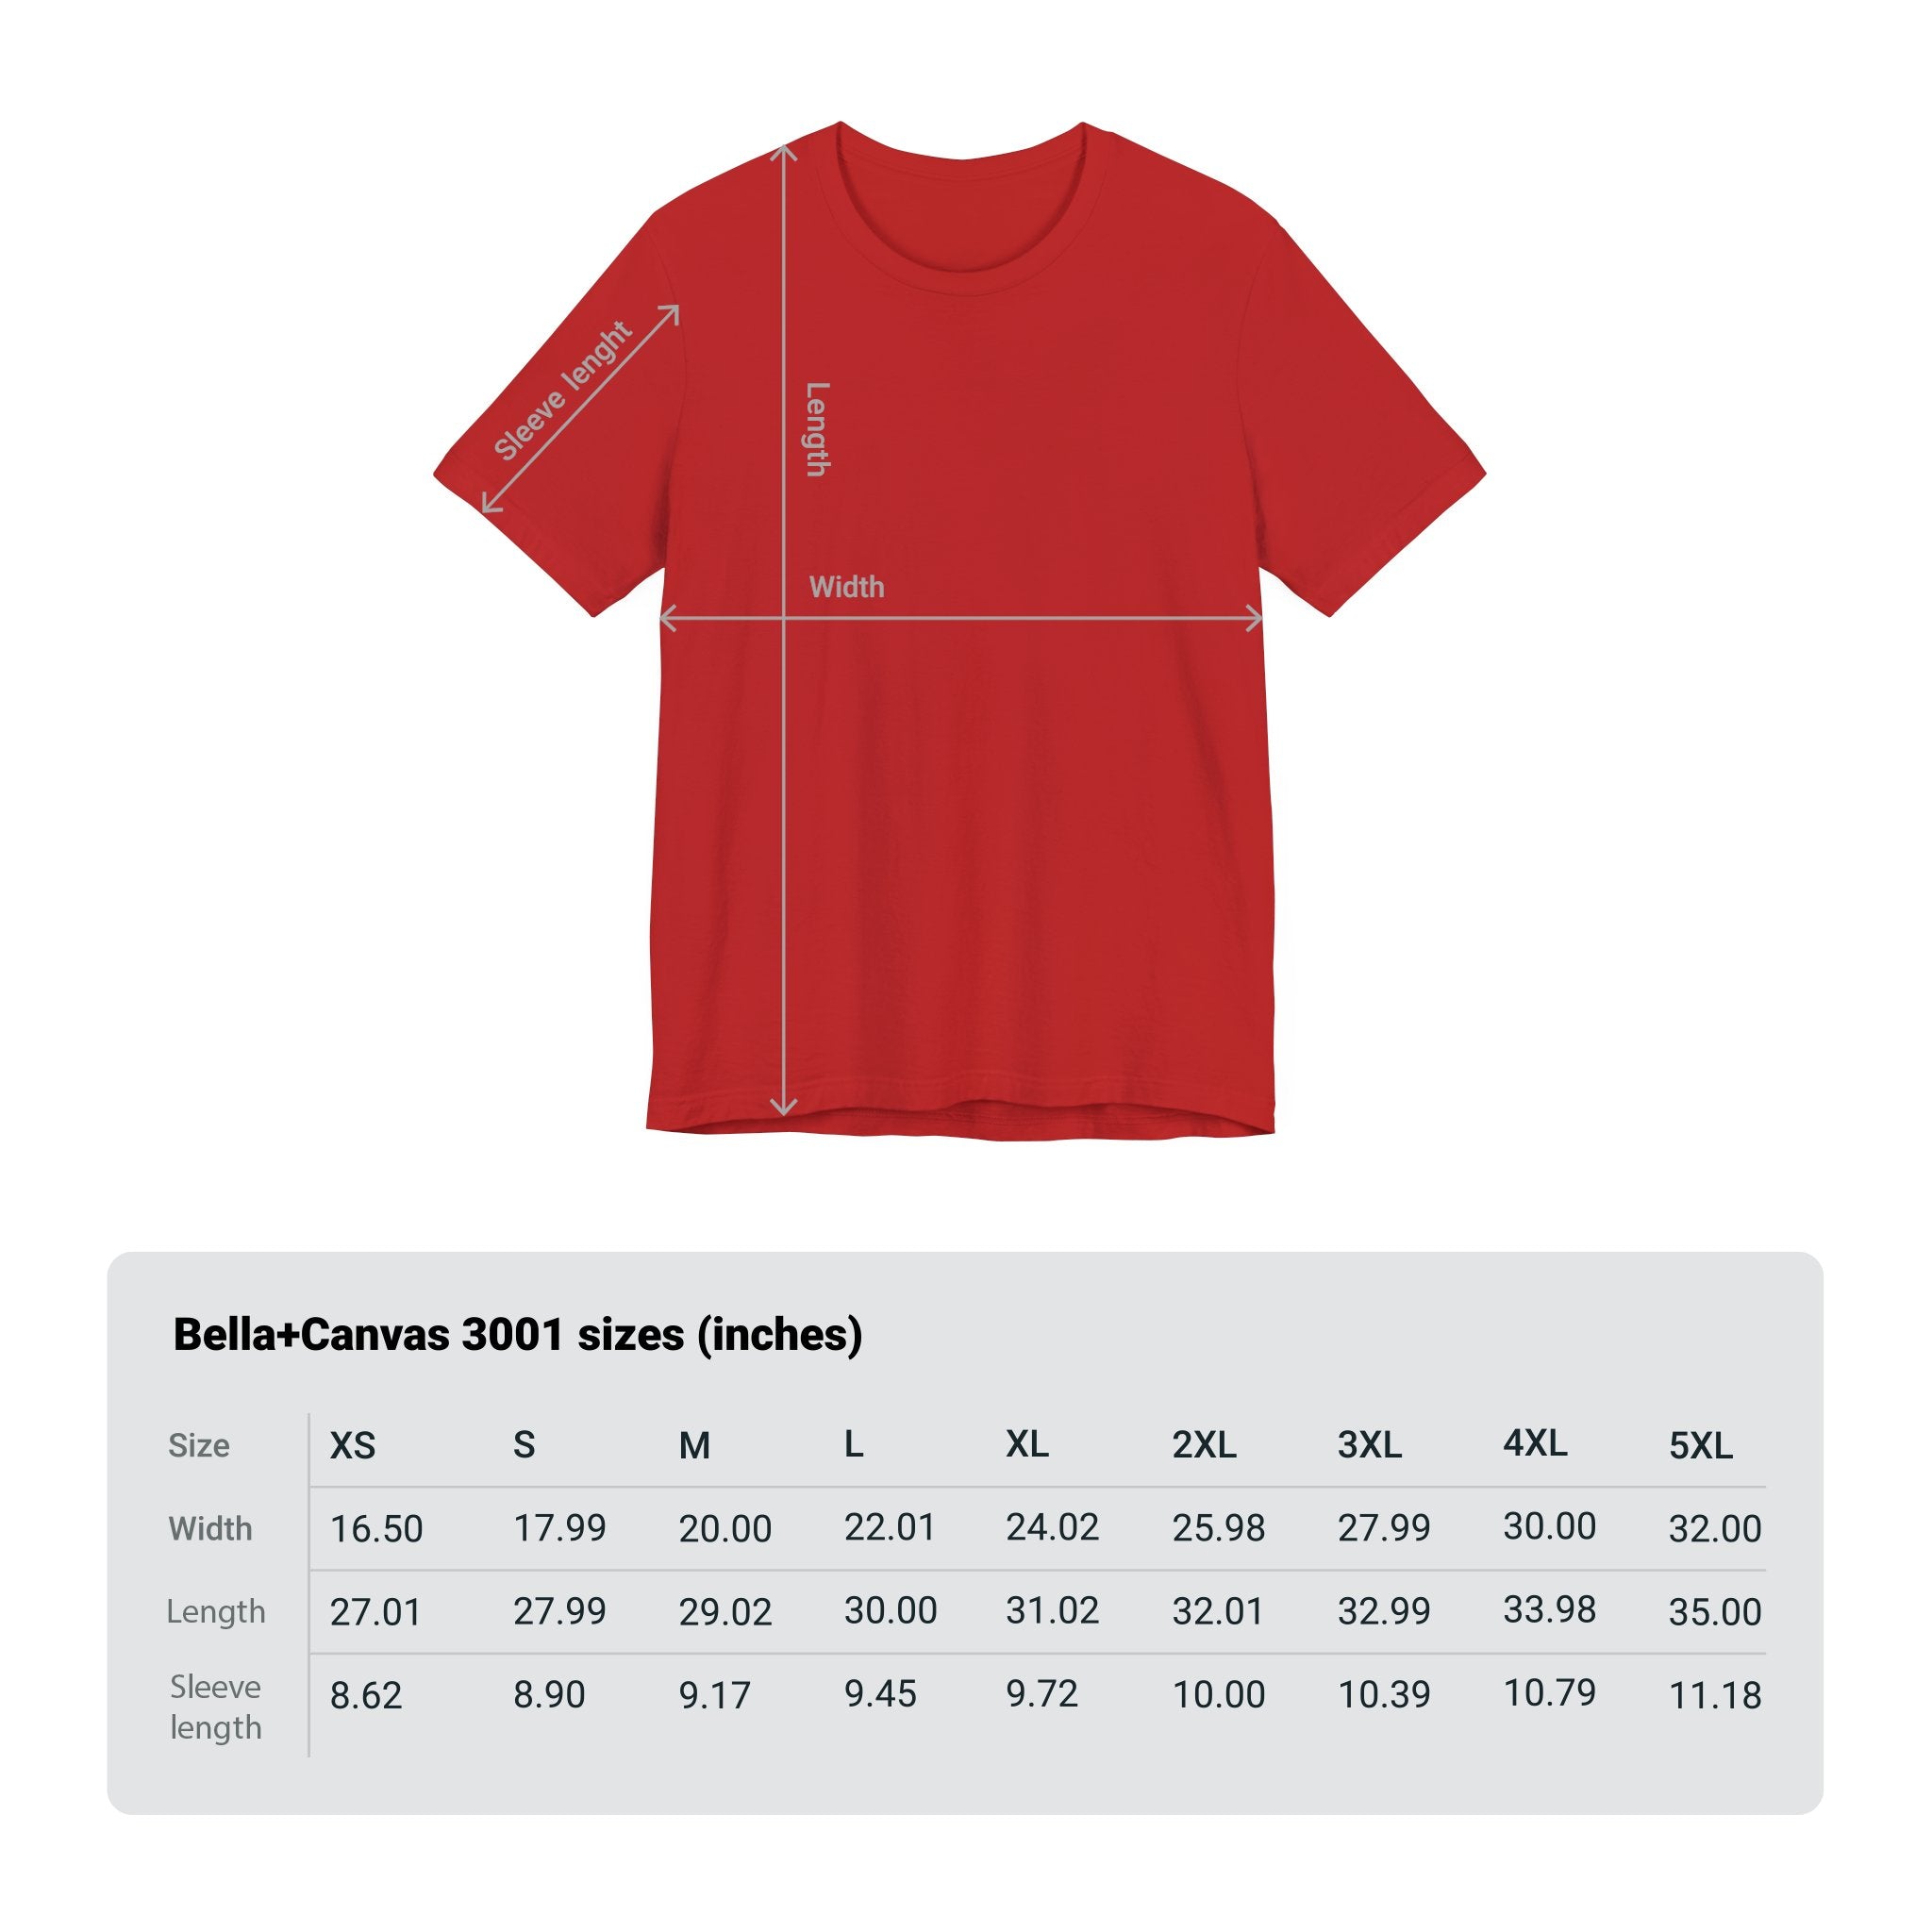 Unisex jersey tee with measurement lines and a size chart for various dimensions below the image.
Product Name: W-H-At-Pro Measure Tee